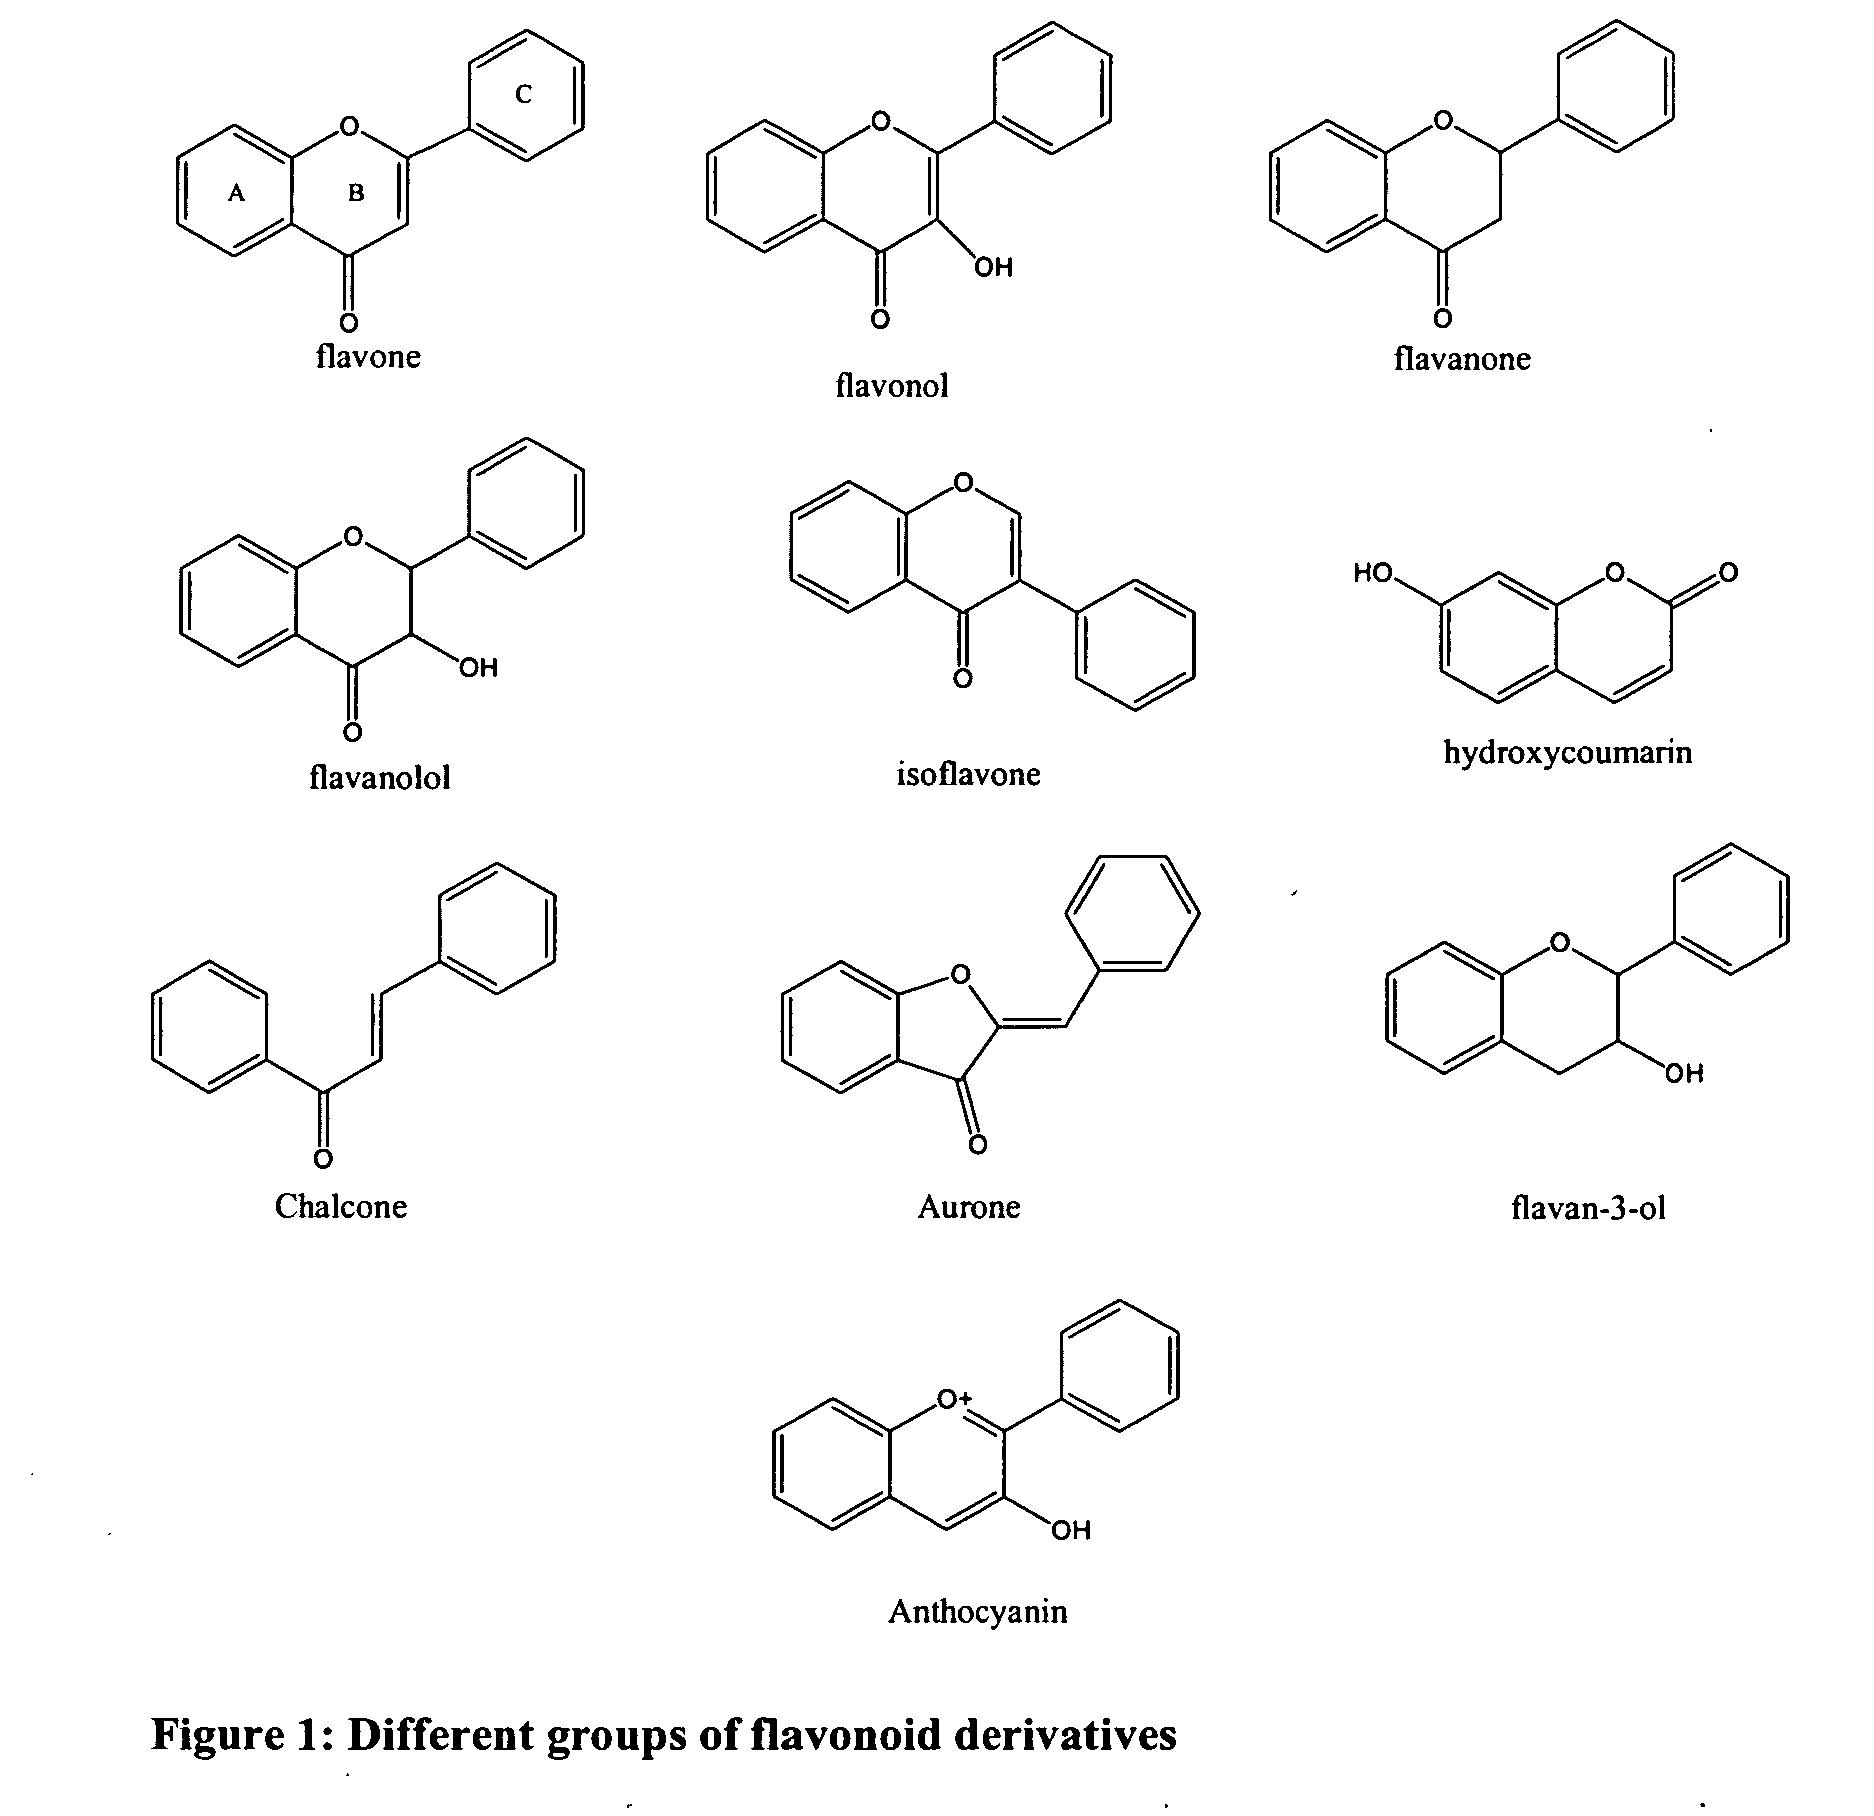 Esters of flavonoids with w-substituted c6-c22 fatty acids